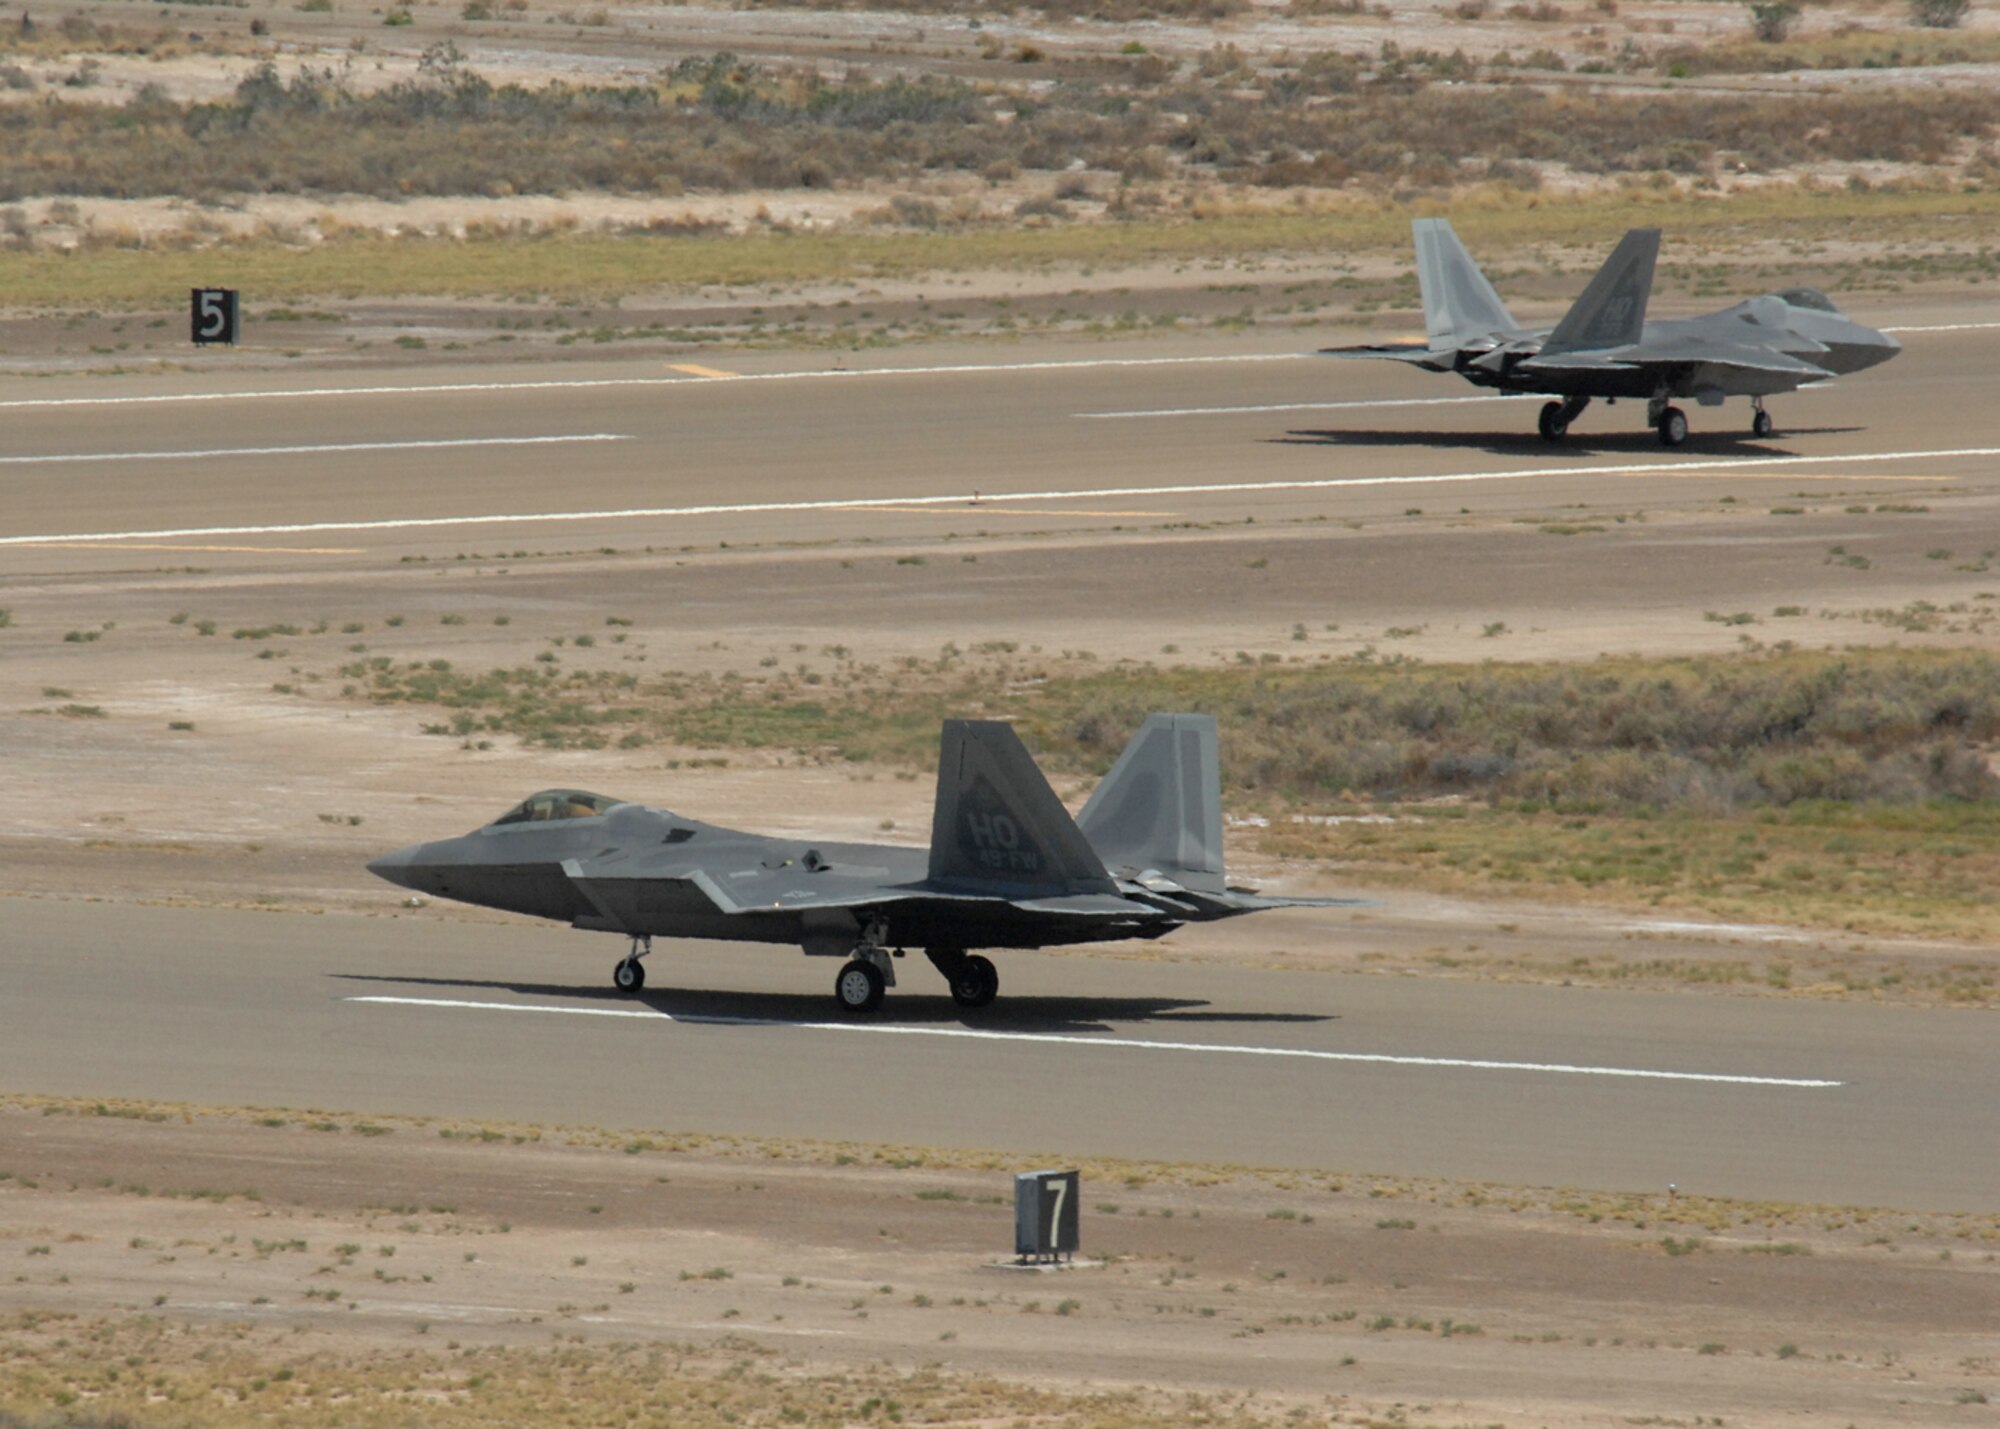 Col. Jeff Harrigian, 49th Fighter Wing commander, and Lt. Col. Mike Hernandez, 7th Fighter Squadron commander, taxi a pair of F-22A Raptors at Holloman Air Force Base, N.M., June 2. The jets are the first two Holloman-tailed F-22s to arrive on base. Prior to landing, the jets flew over the Tularosa Basin, allowing the local community a chance to witness the future of Holloman. (U.S. Air Force photo/Senior Airman Tiffany Trojca)